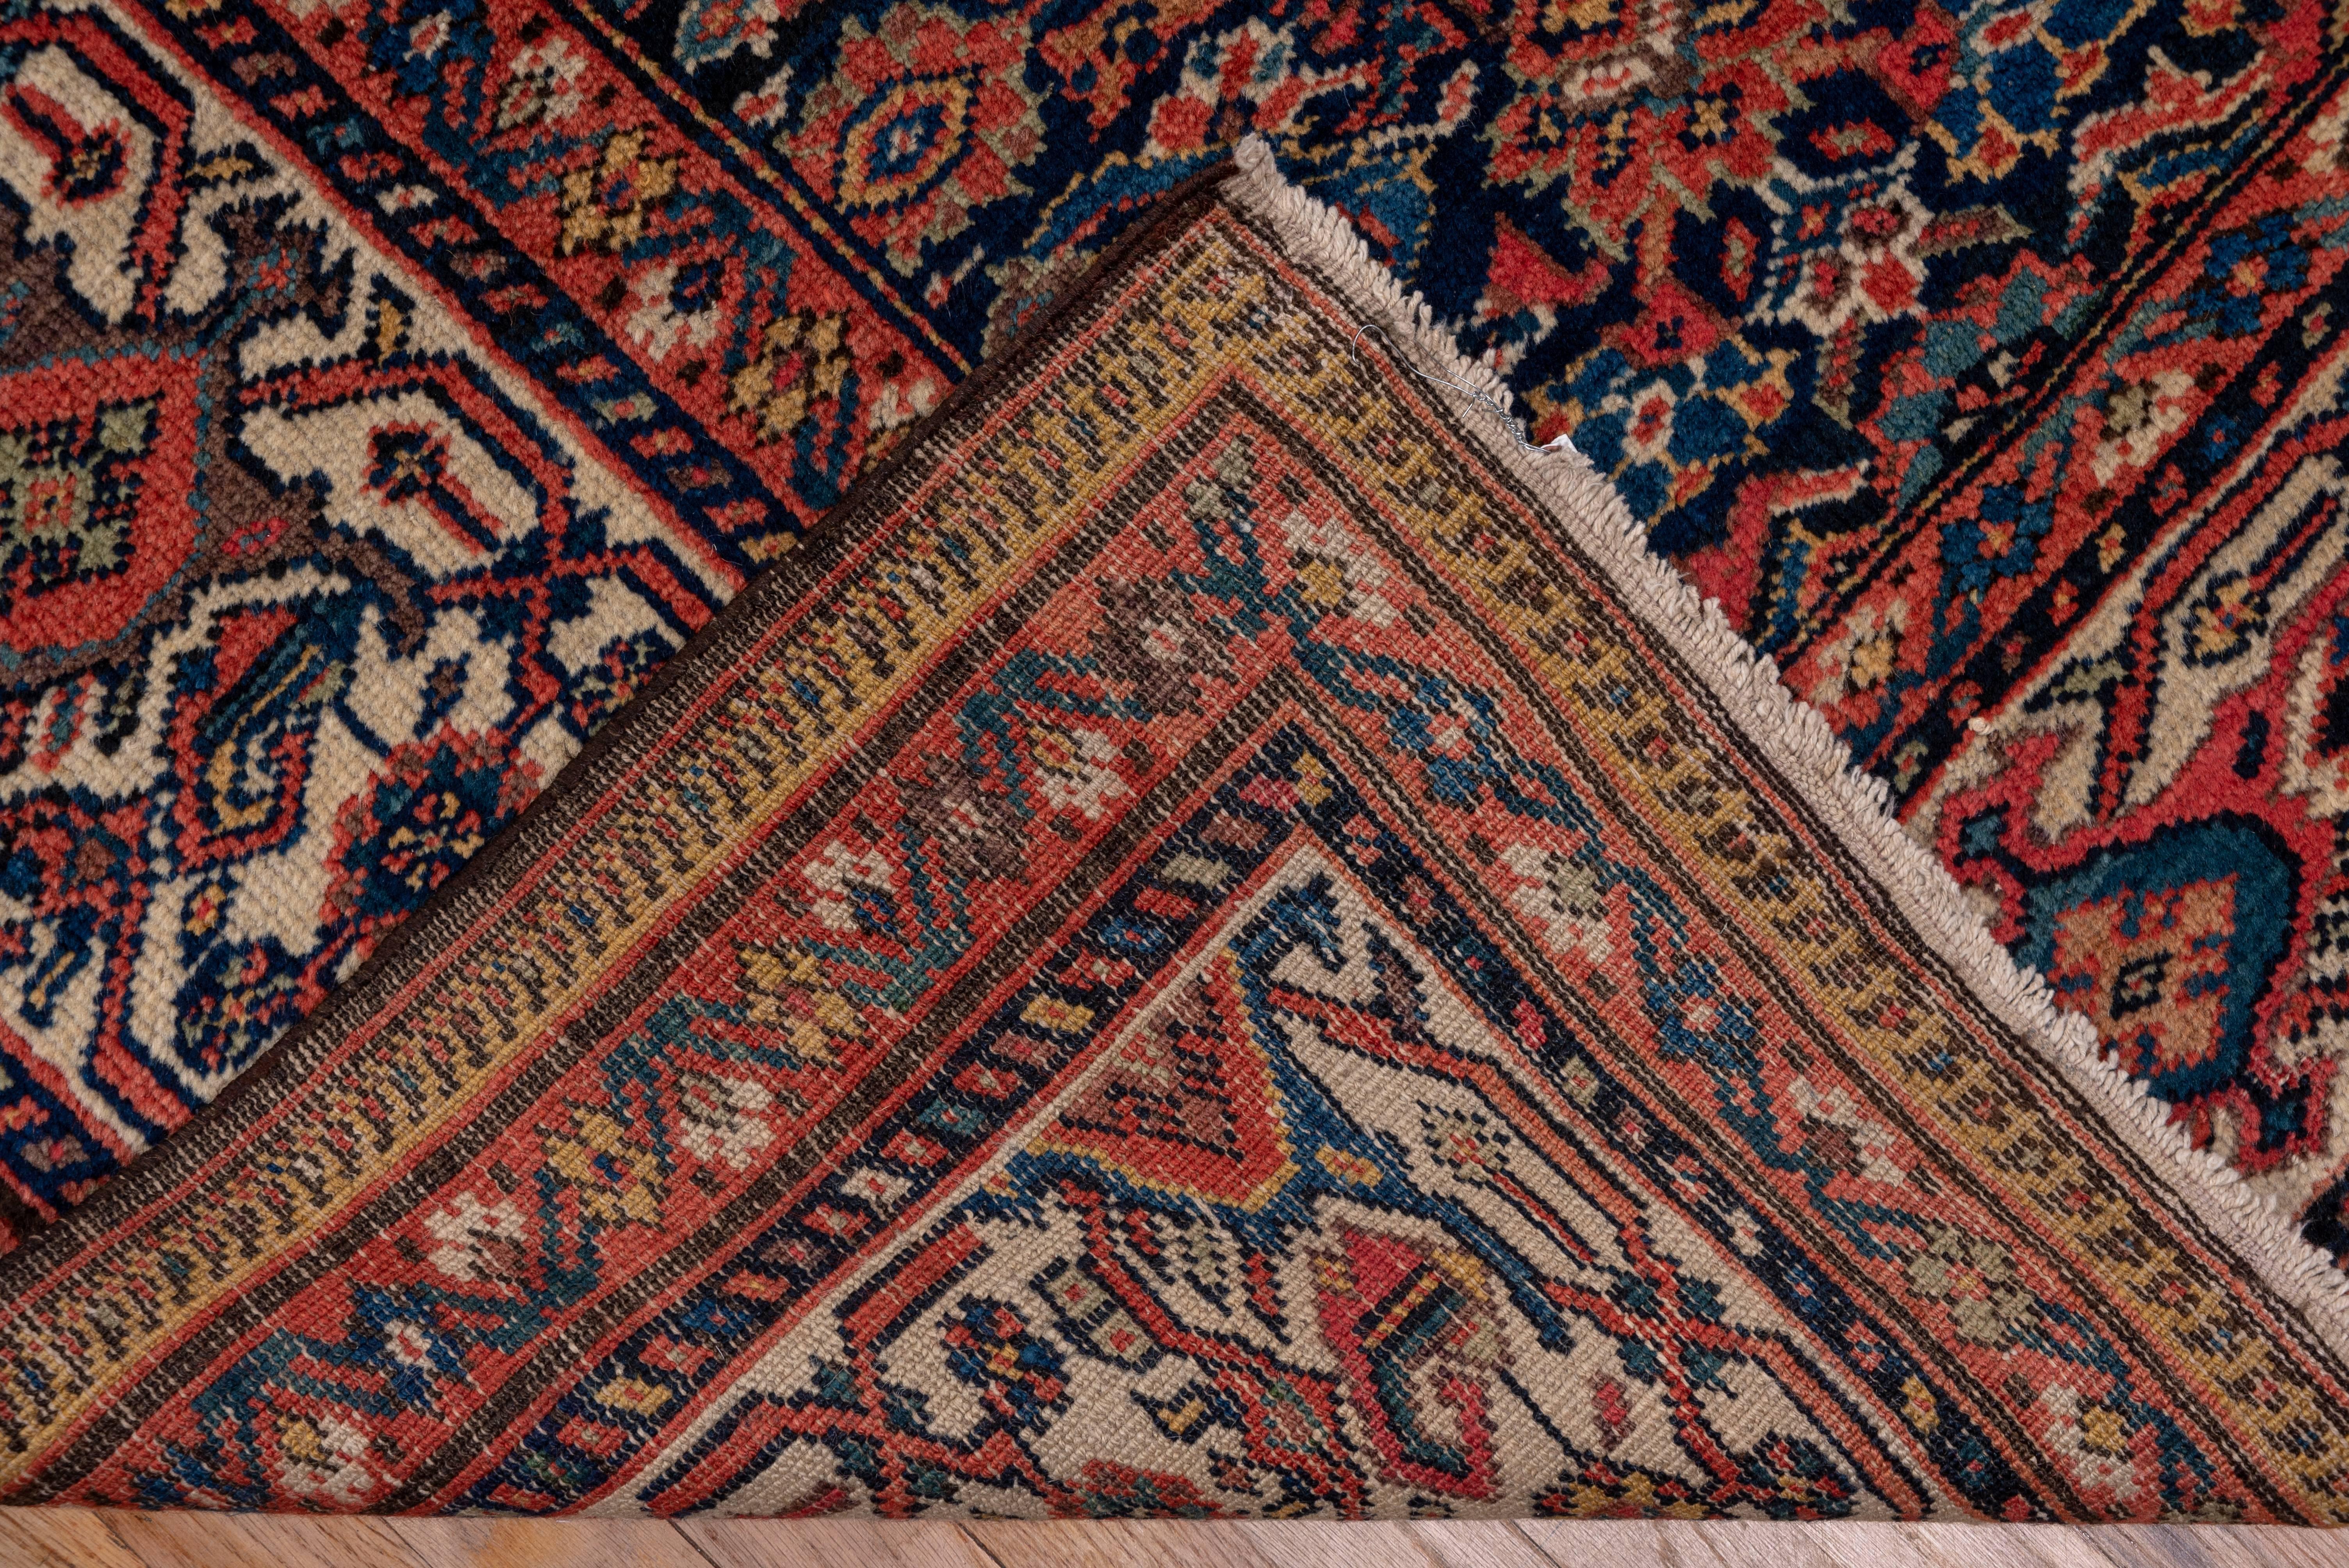 Tribal Antique Persian Mahal Carpet, Circa 1910s In Excellent Condition For Sale In New York, NY